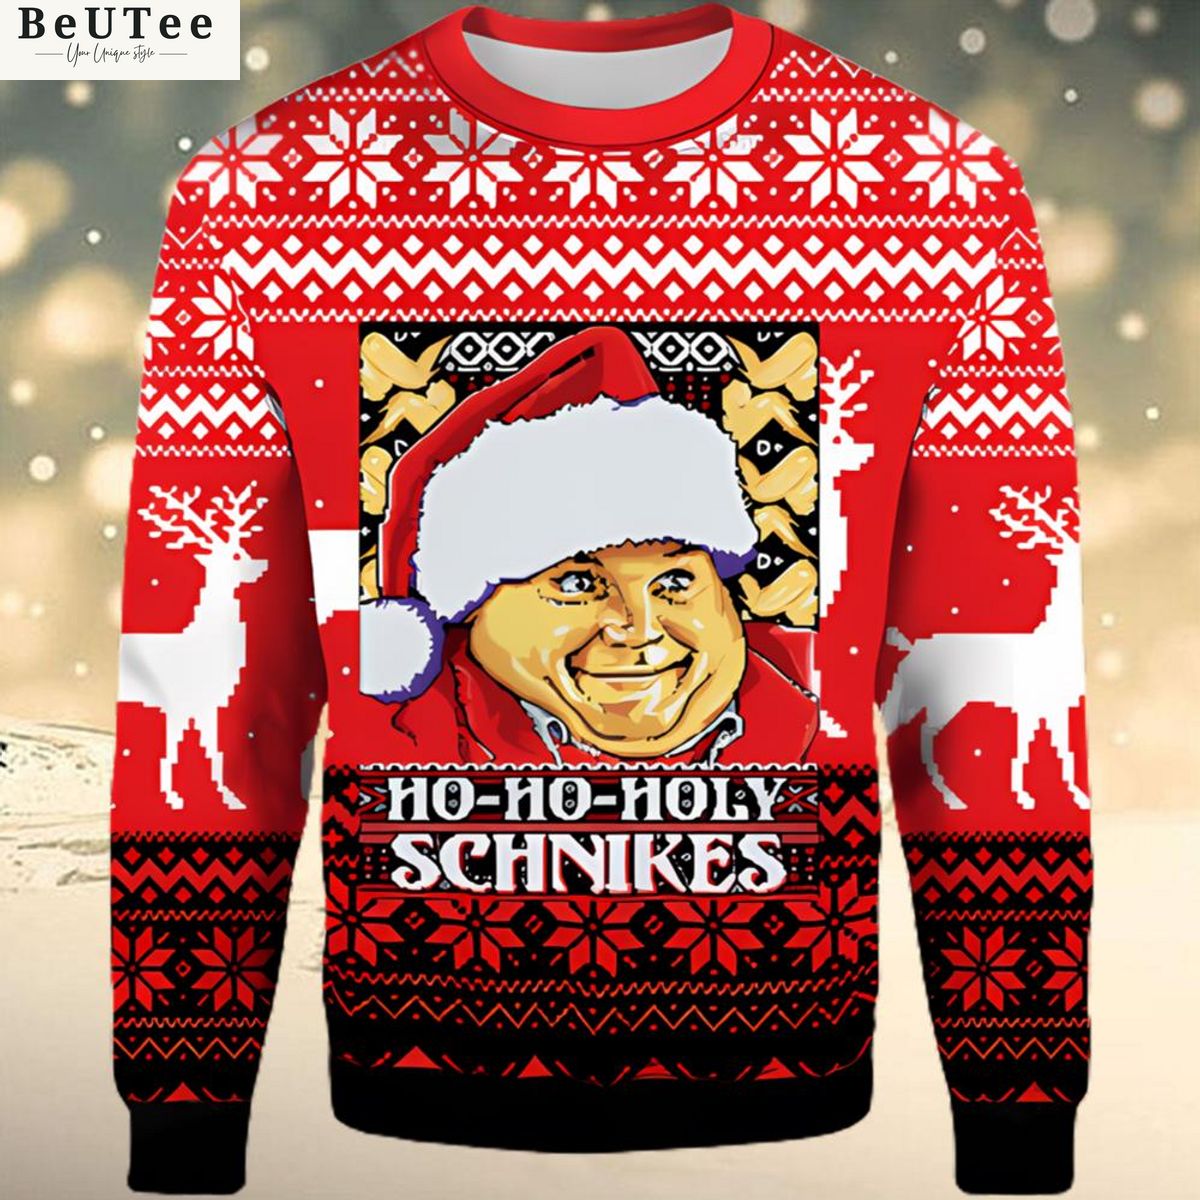 Chris Farley Ho Ho Holy Schnikes Christmas Sweater Jumper Impressive picture.